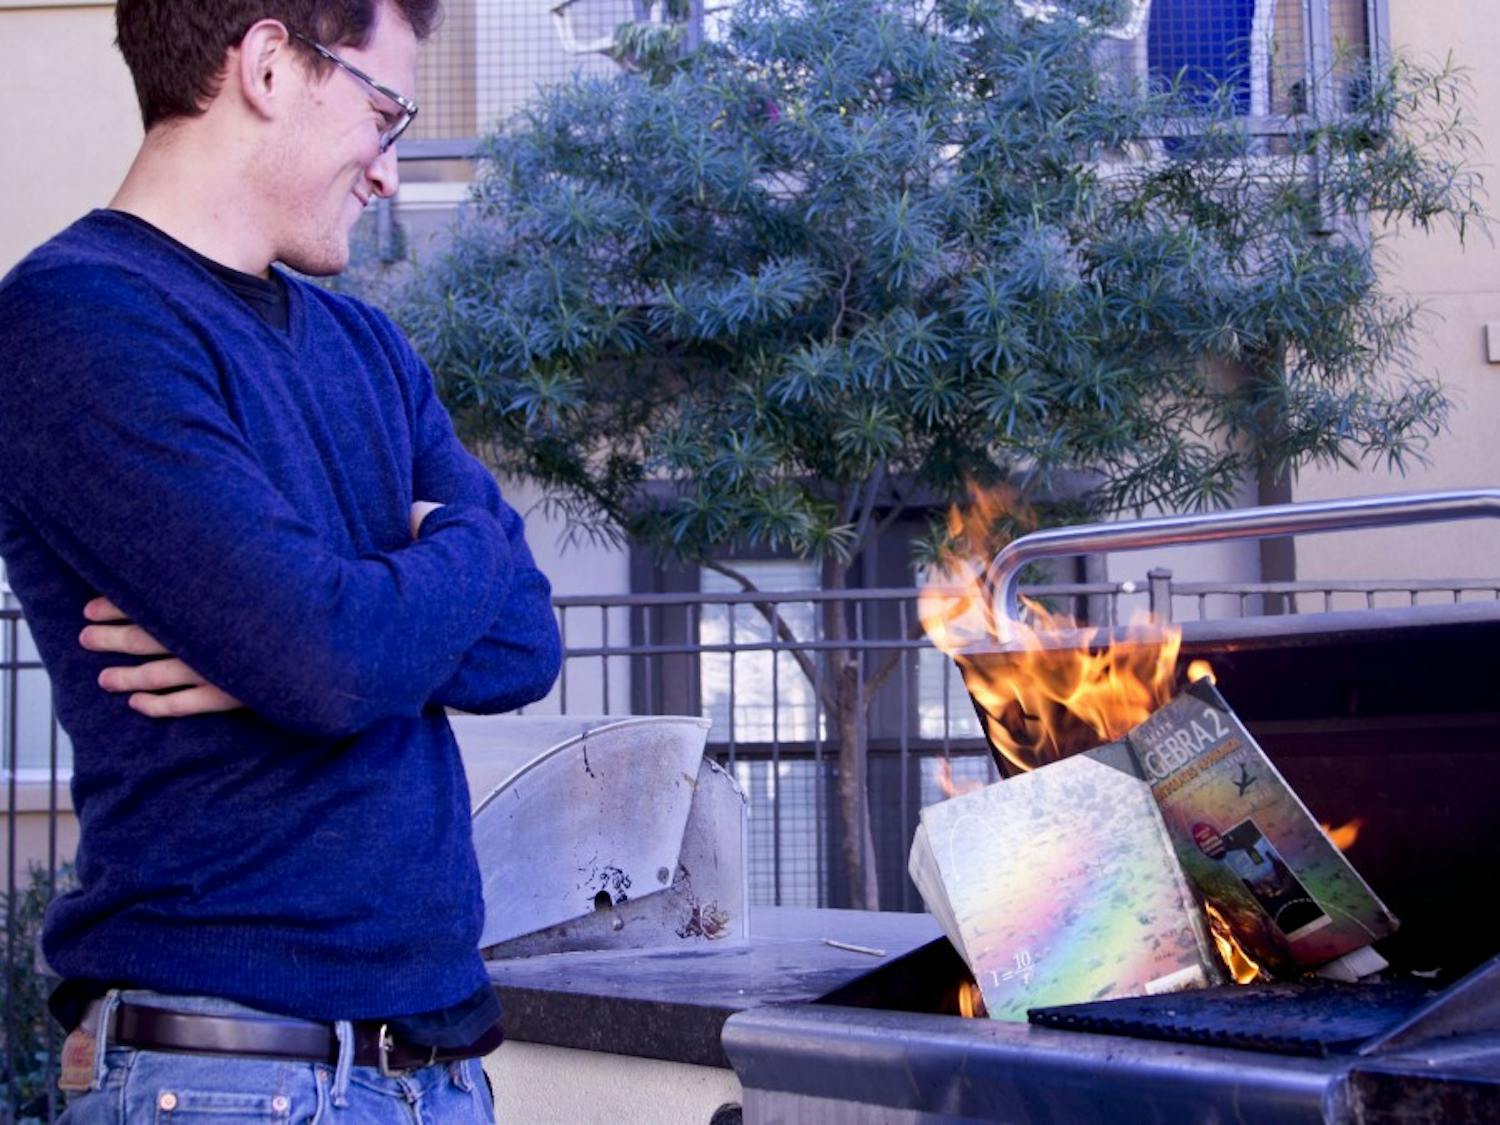 Writer Ryan Espinoza-Marcus cheerfully stands by watching the flame consume an old textbook.
Photo by Ana Ramirez